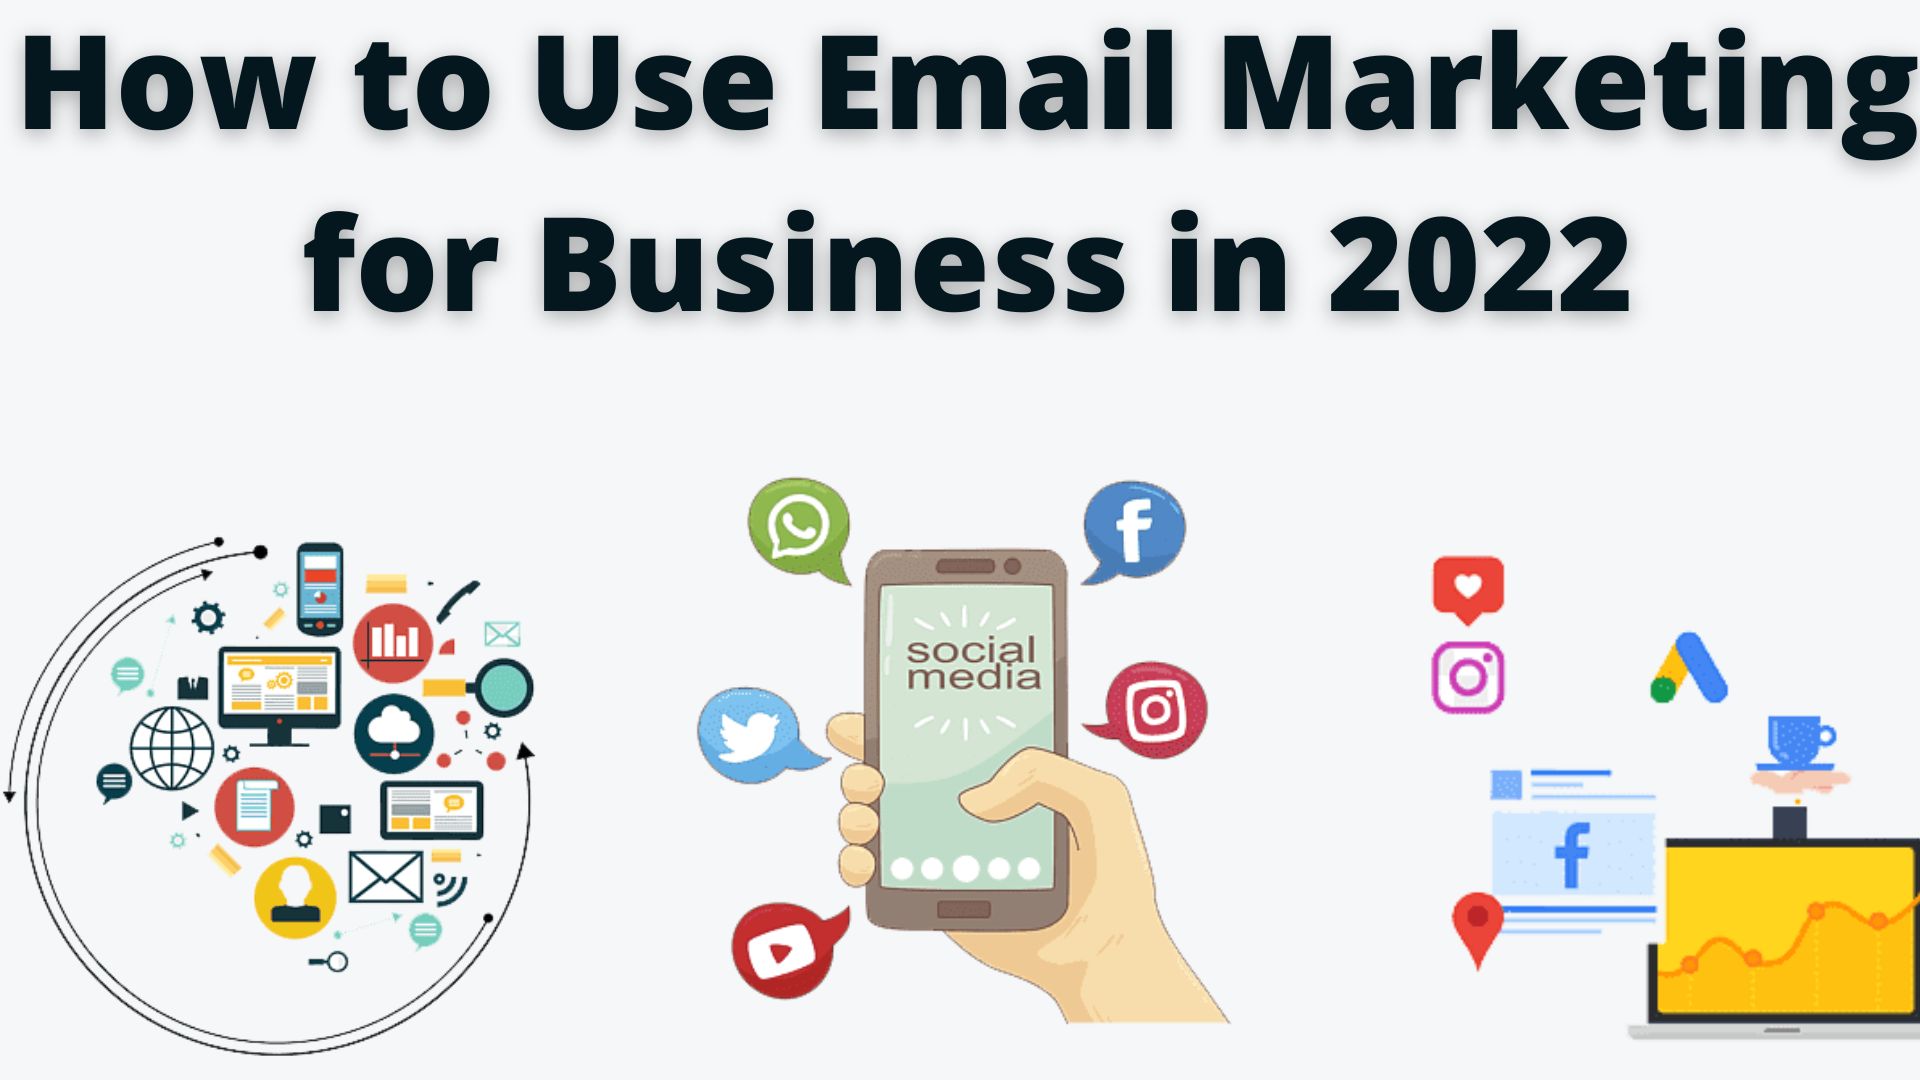 How to use email marketing for business in 2022